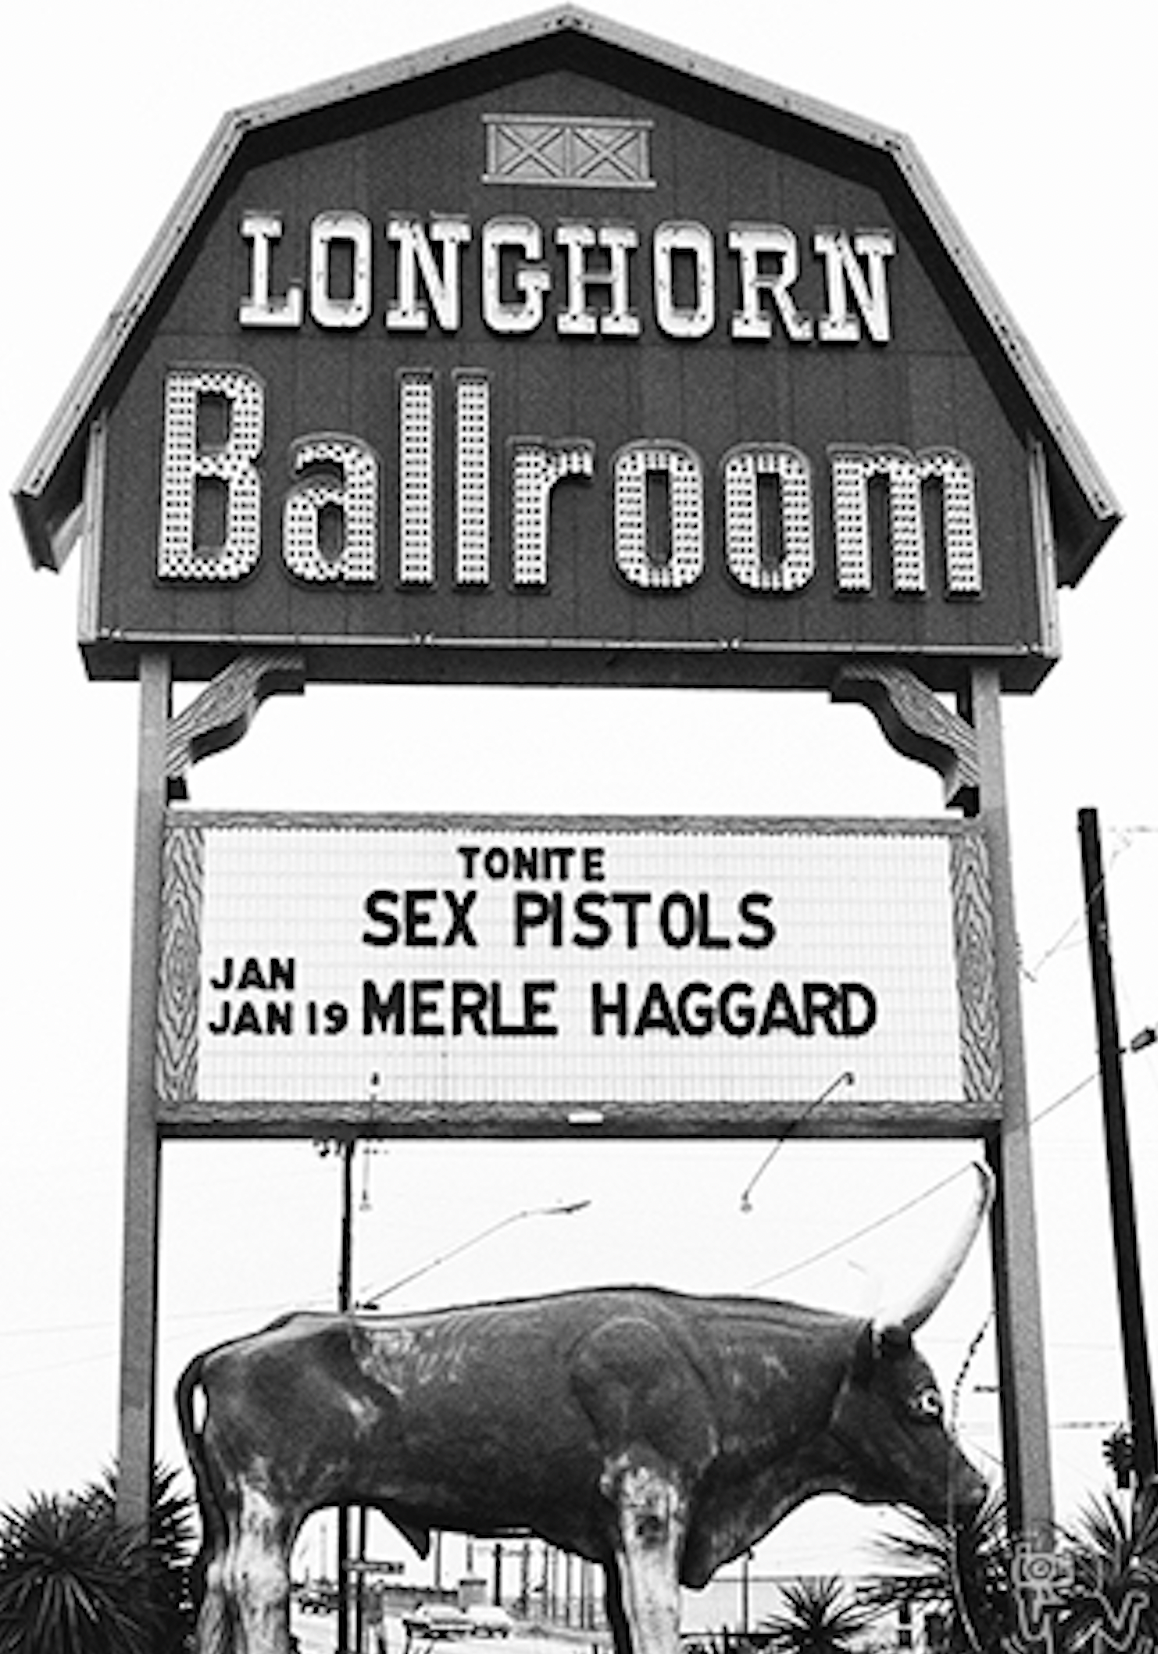 A photo of the marquee when the Sex Pistols and Merle Haggard played there back to back.